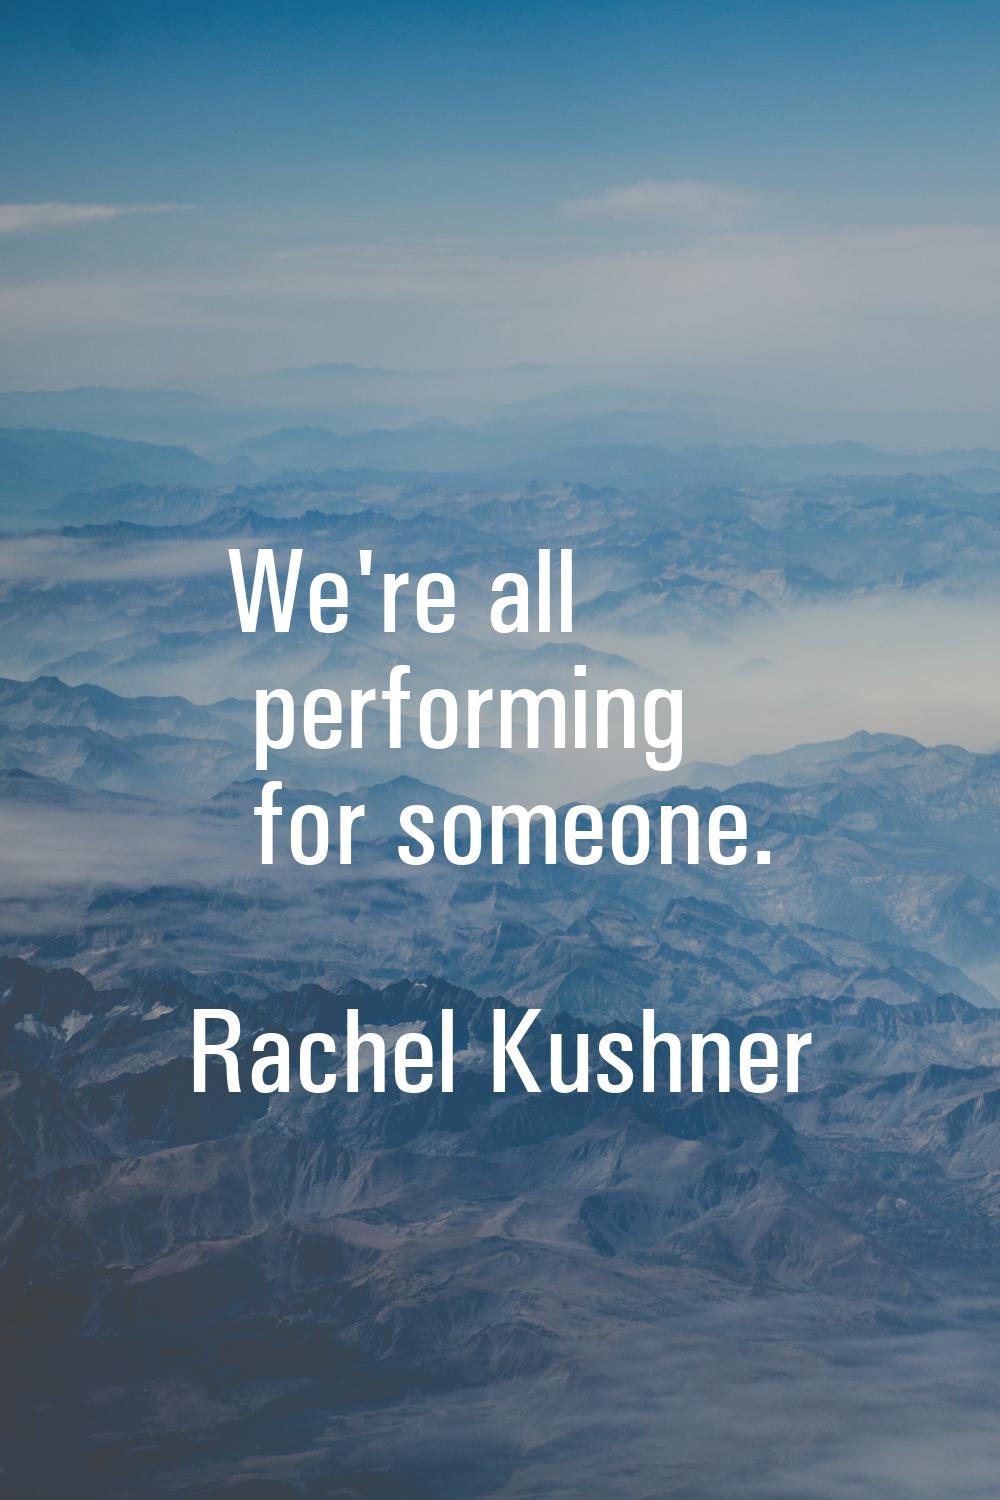 We're all performing for someone.